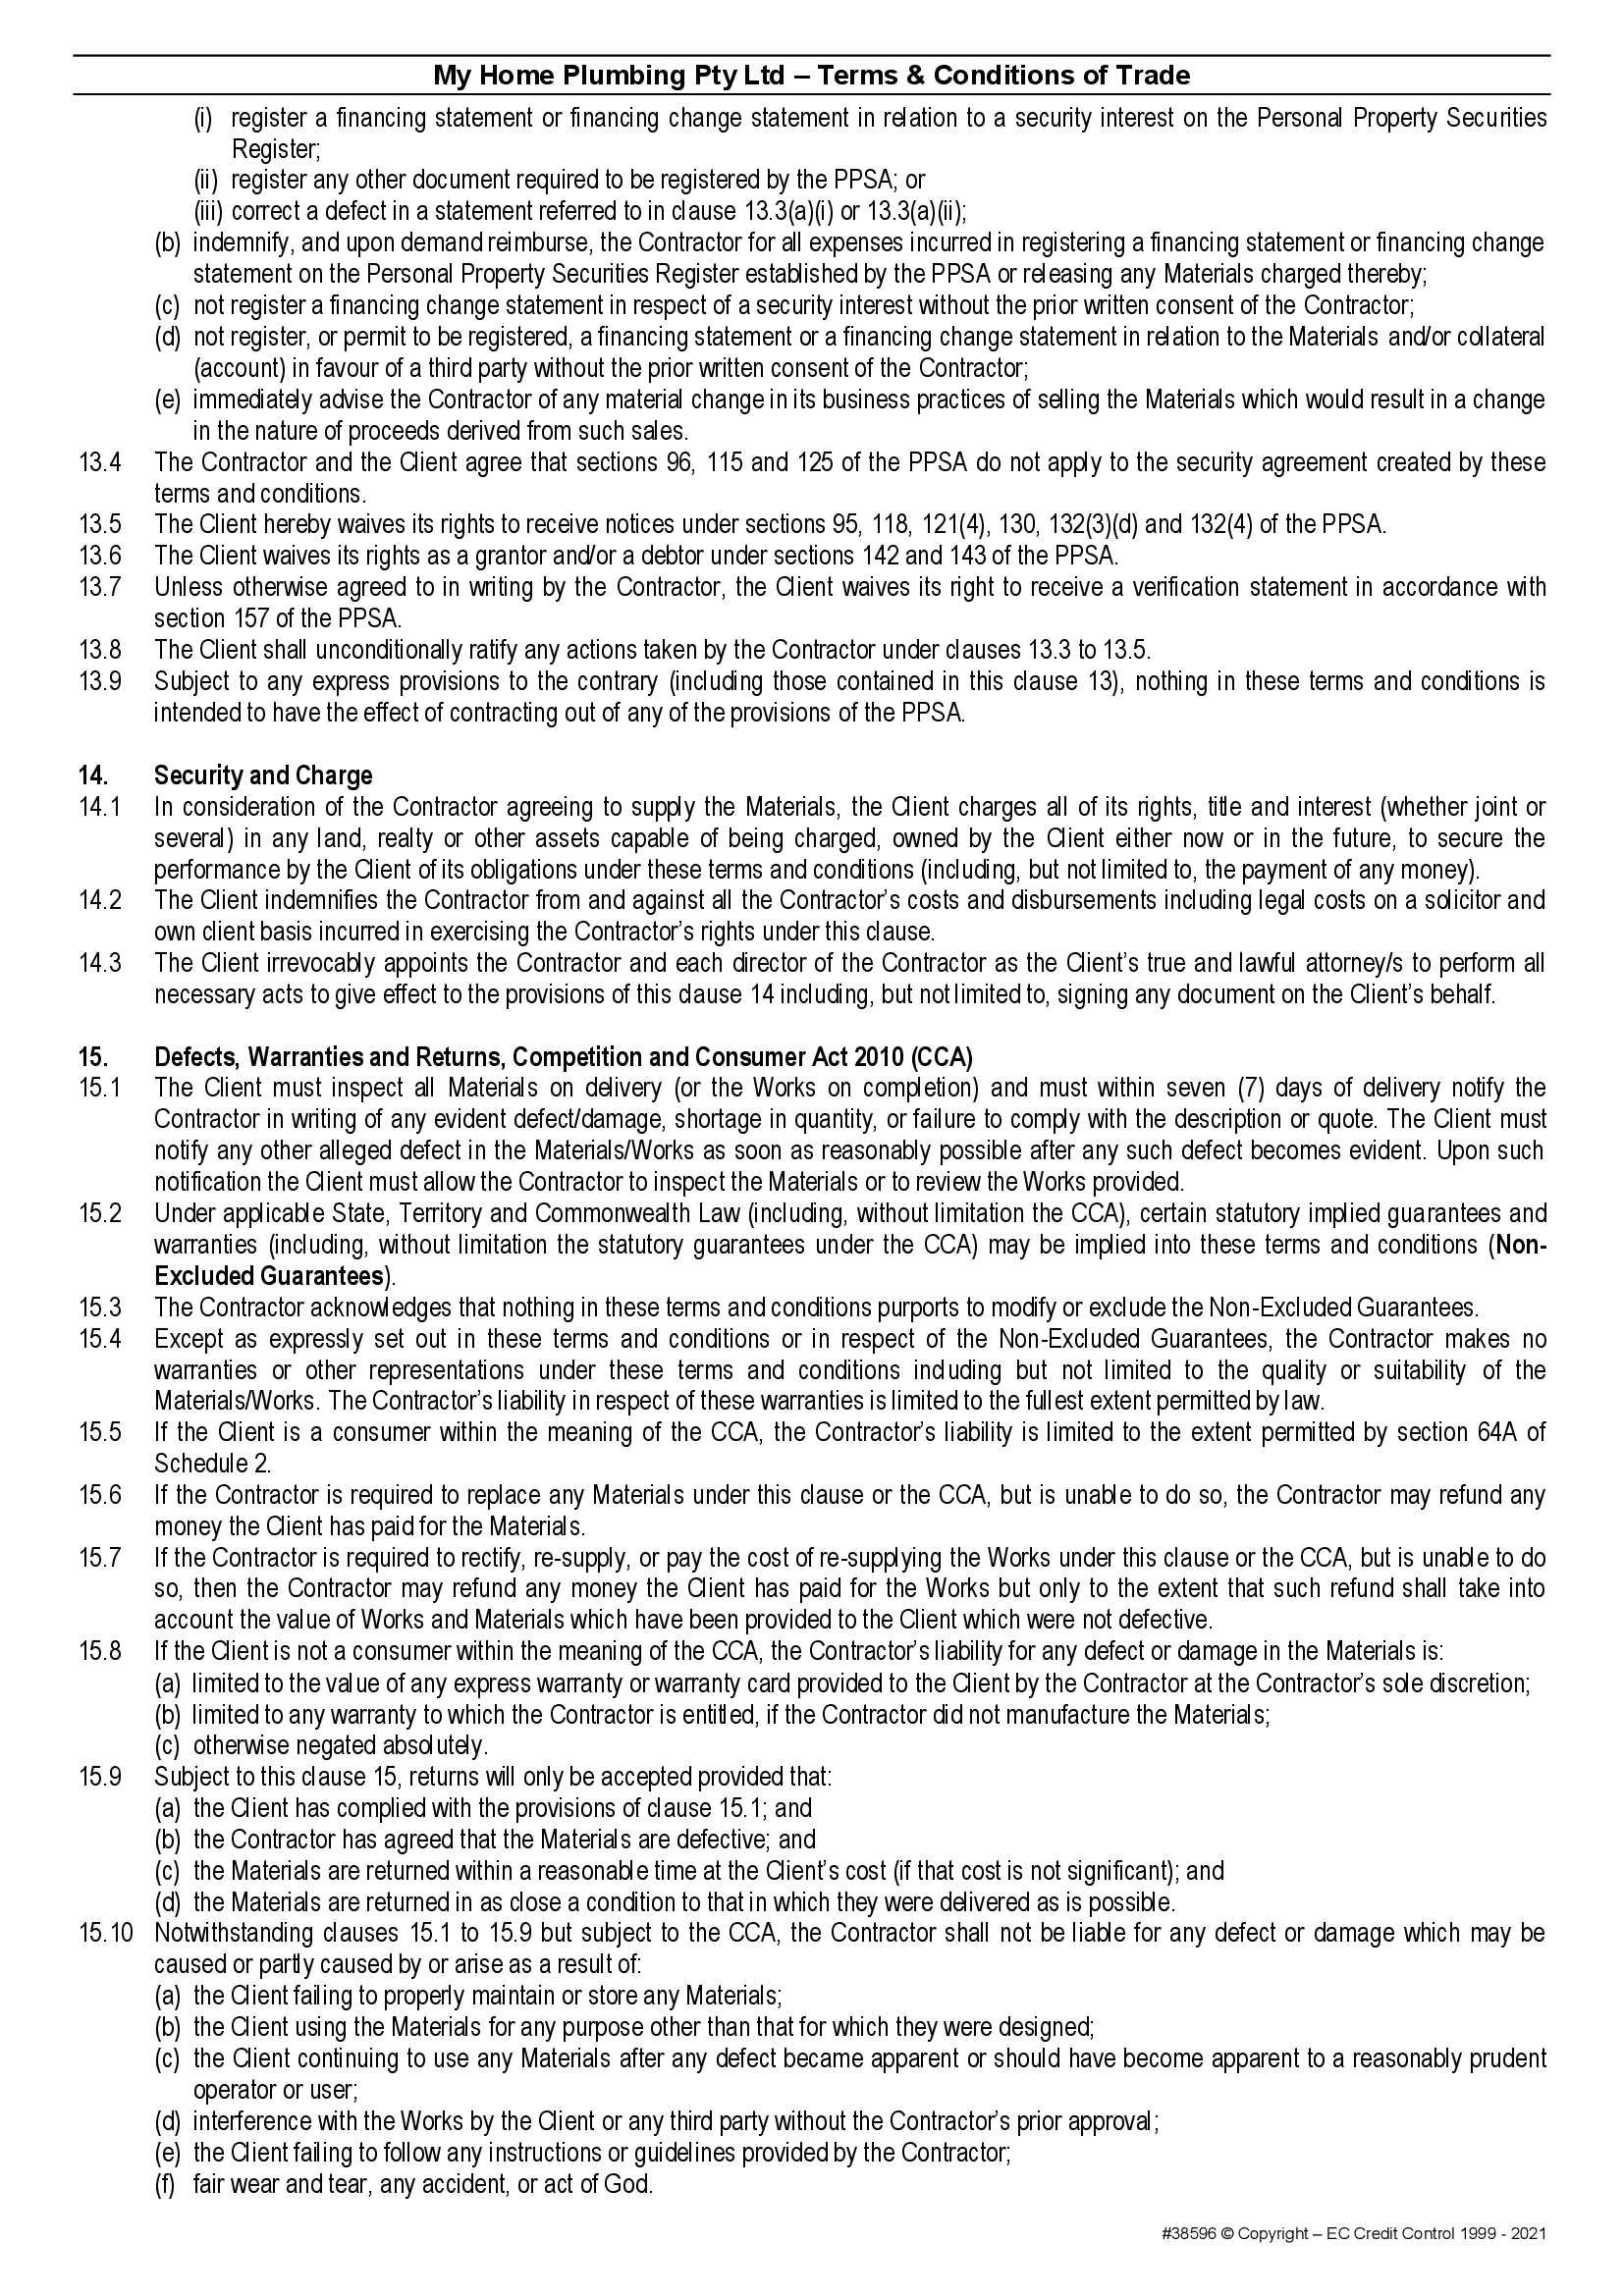 MHP terms and conditions page 5